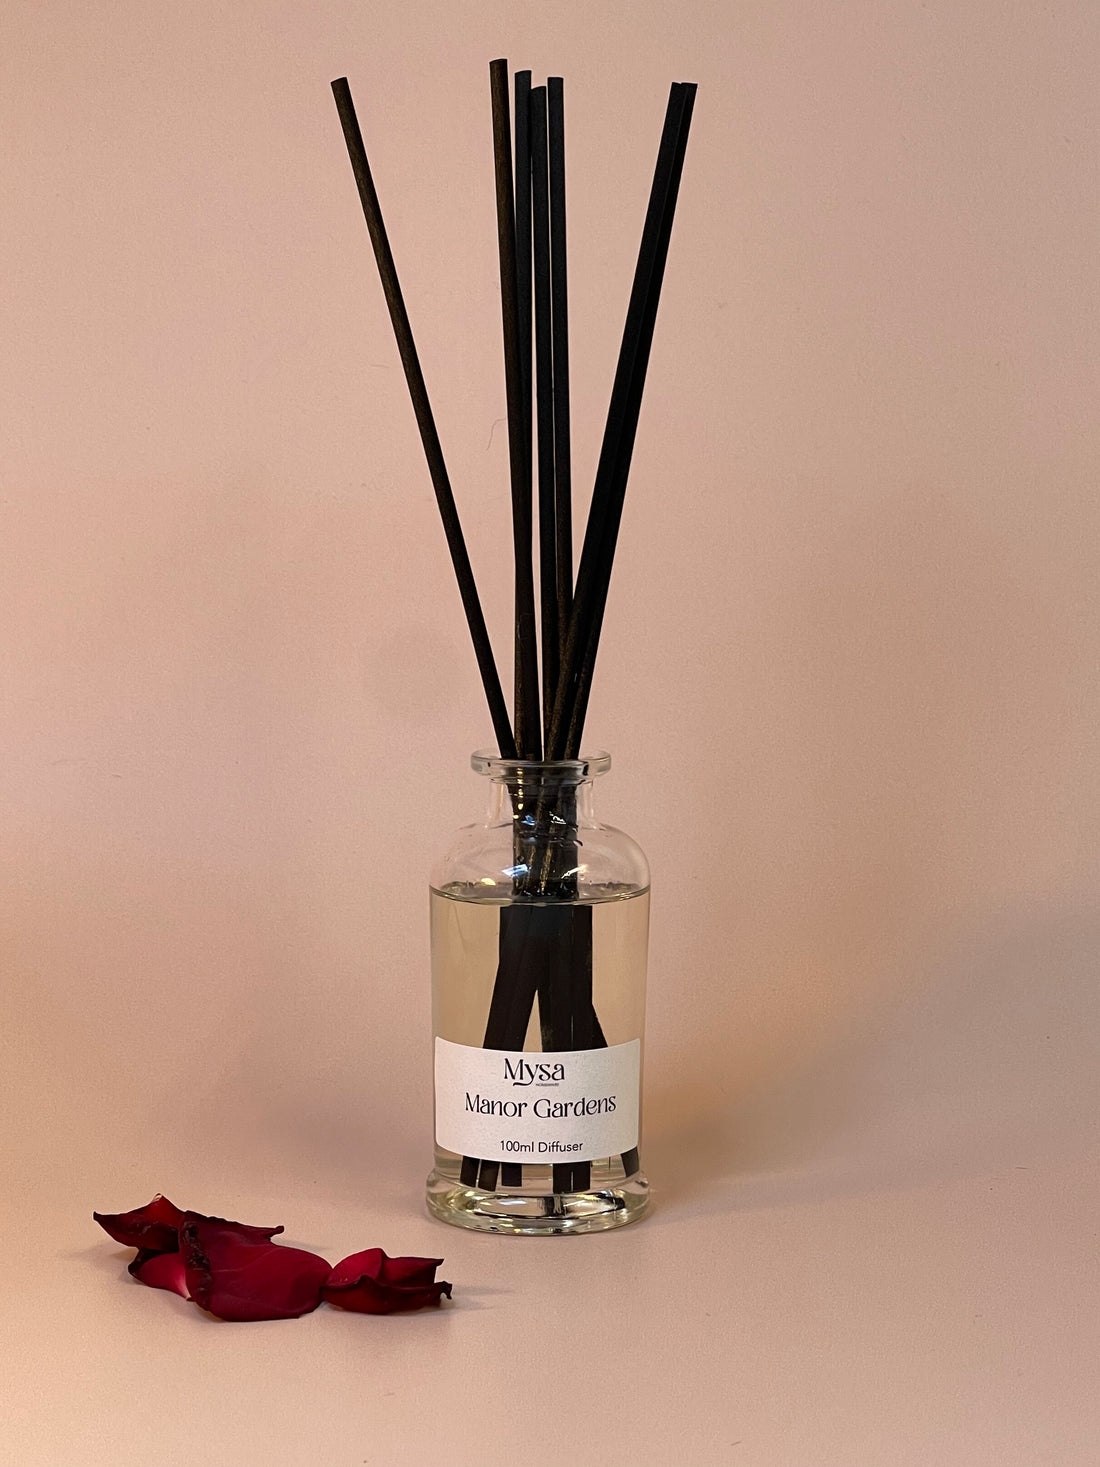 Manor Gardens luxury reed diffuser in gift box, featuring a vegan base oil infused with damson plum, rose and patchouli fragrance.